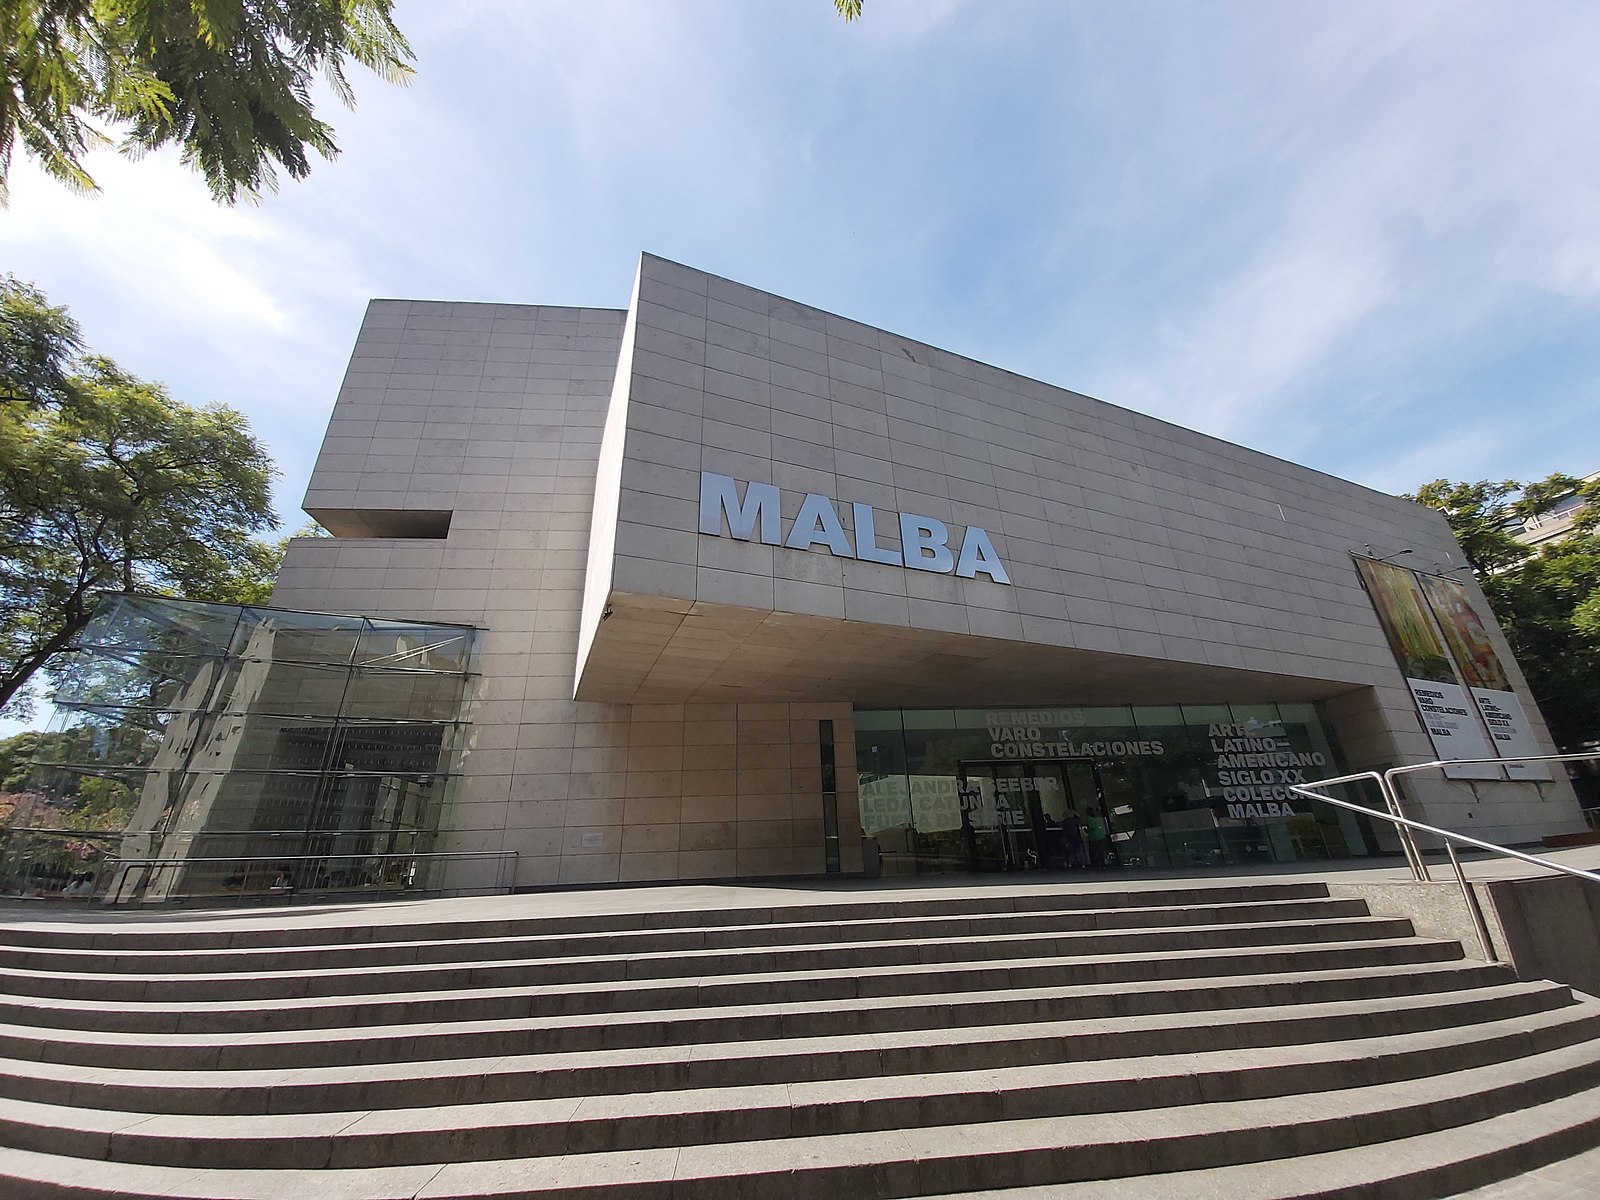 MALBA is inviting the public to celebrate its 22nd anniversary